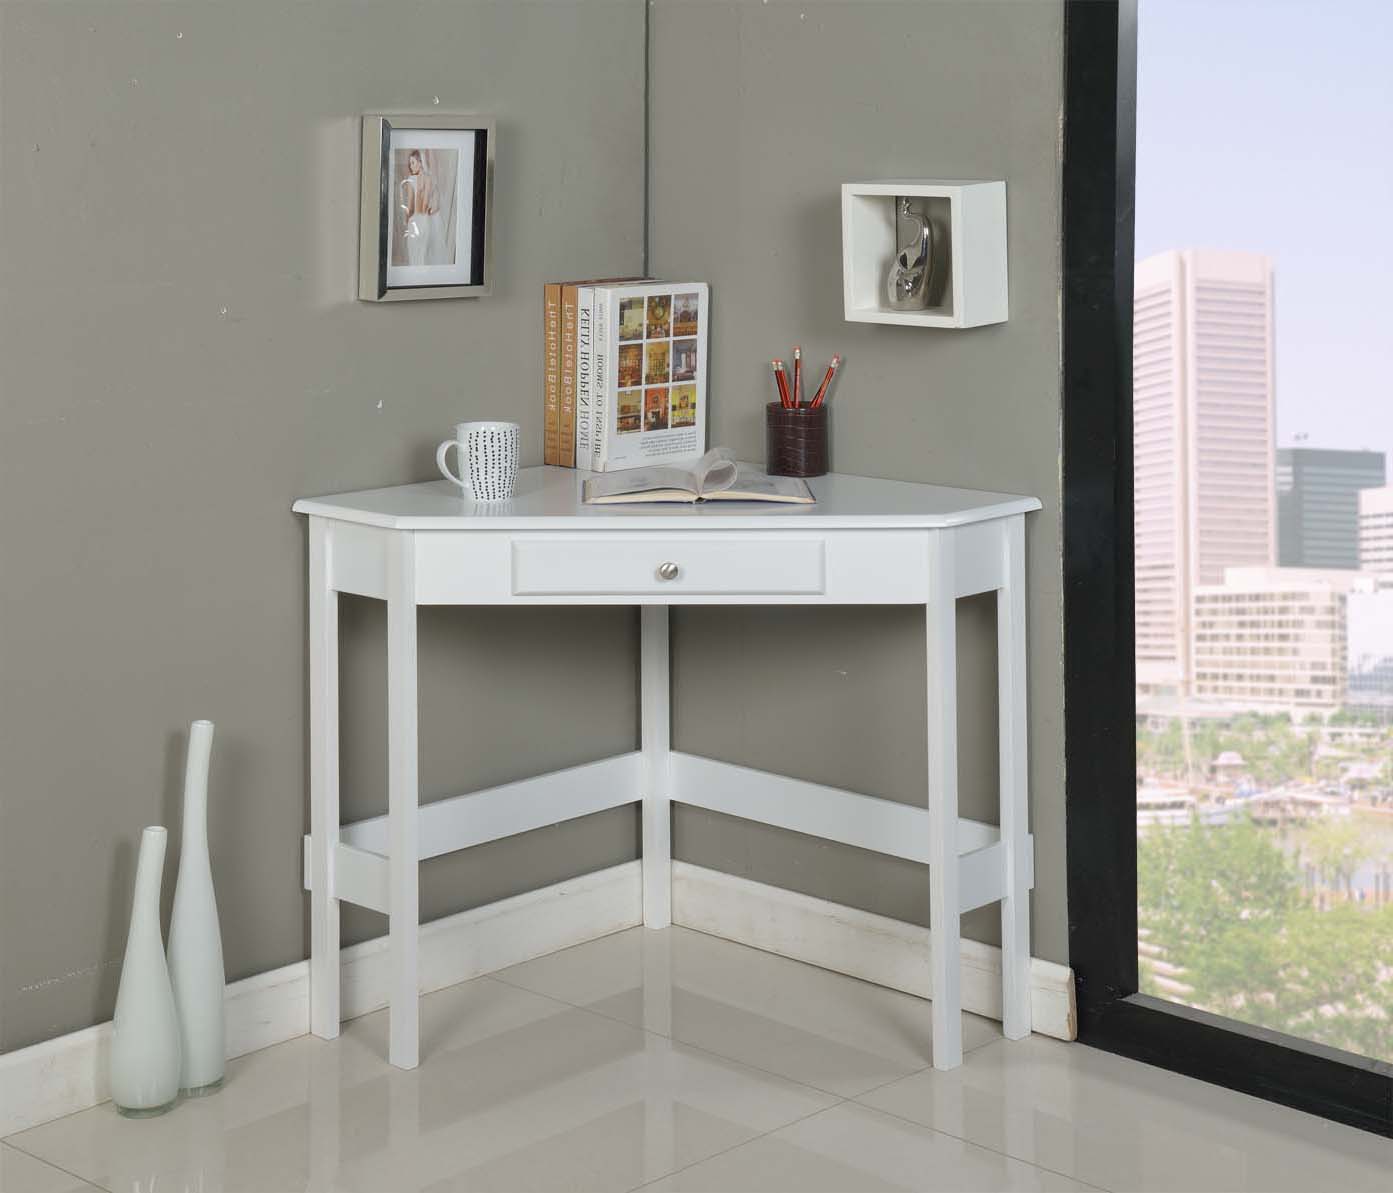 Keira Home & Office Corner Workstation Computer Desk, White Wood, With Storage Drawer - image 1 of 5